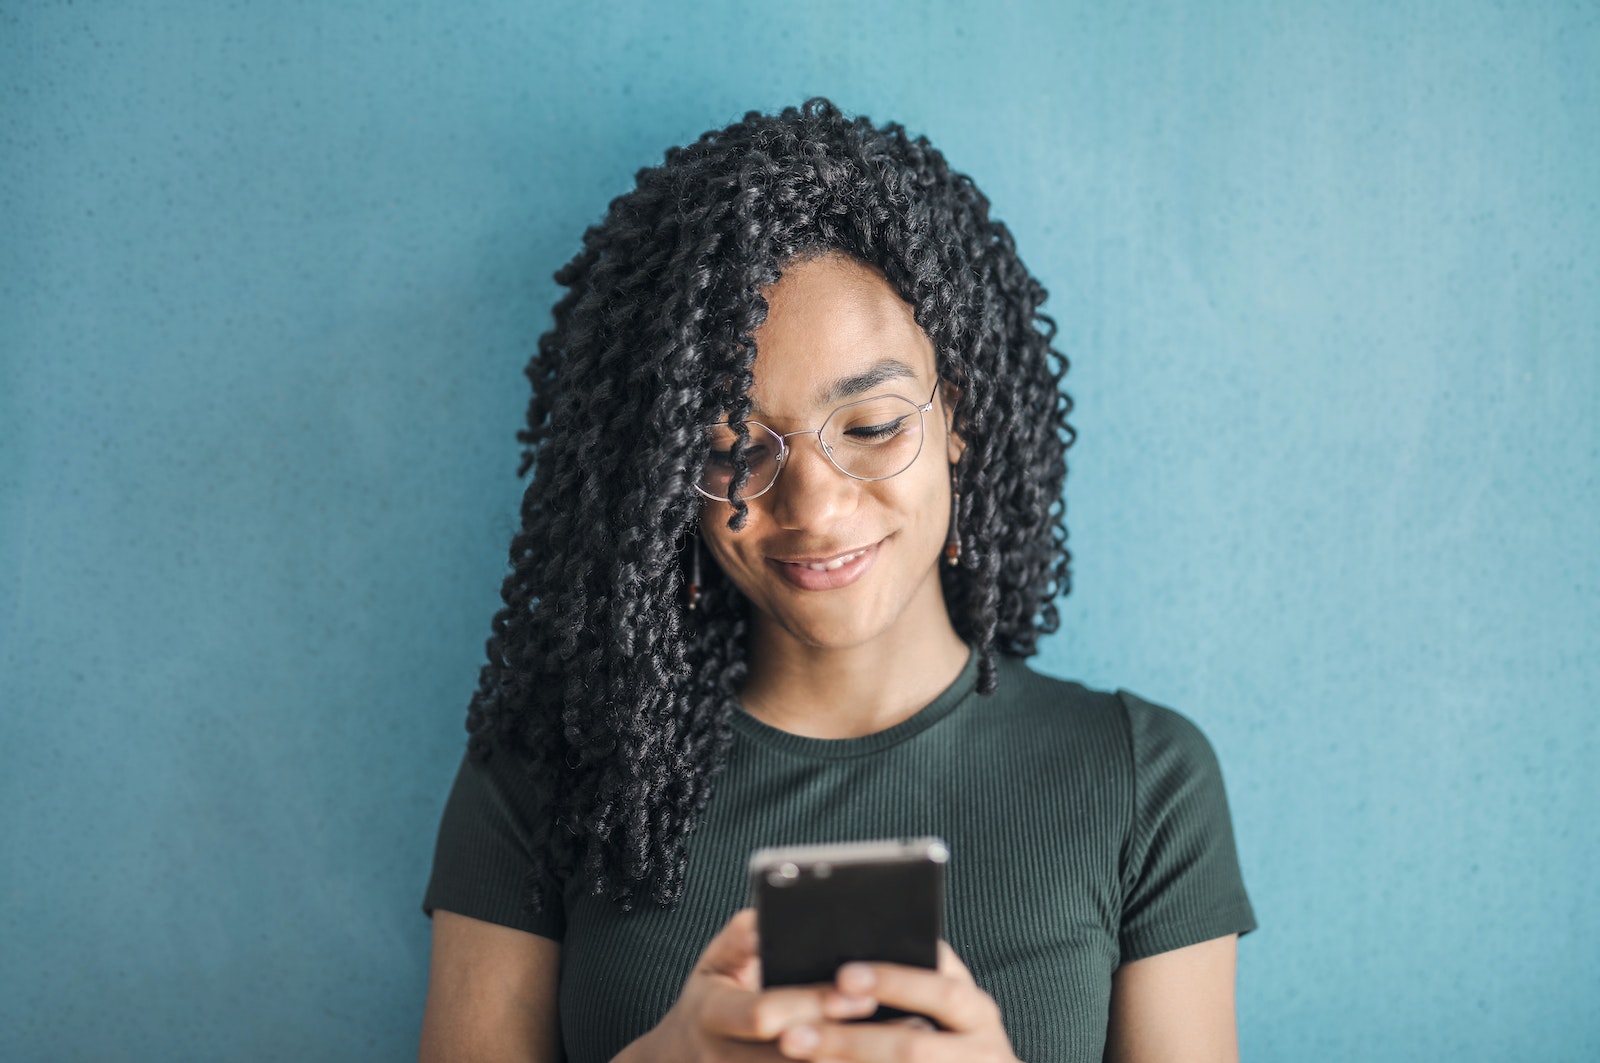 Portrait Photo of Smiling Woman in Black T-shirt and Glasses Using Her Smartphone